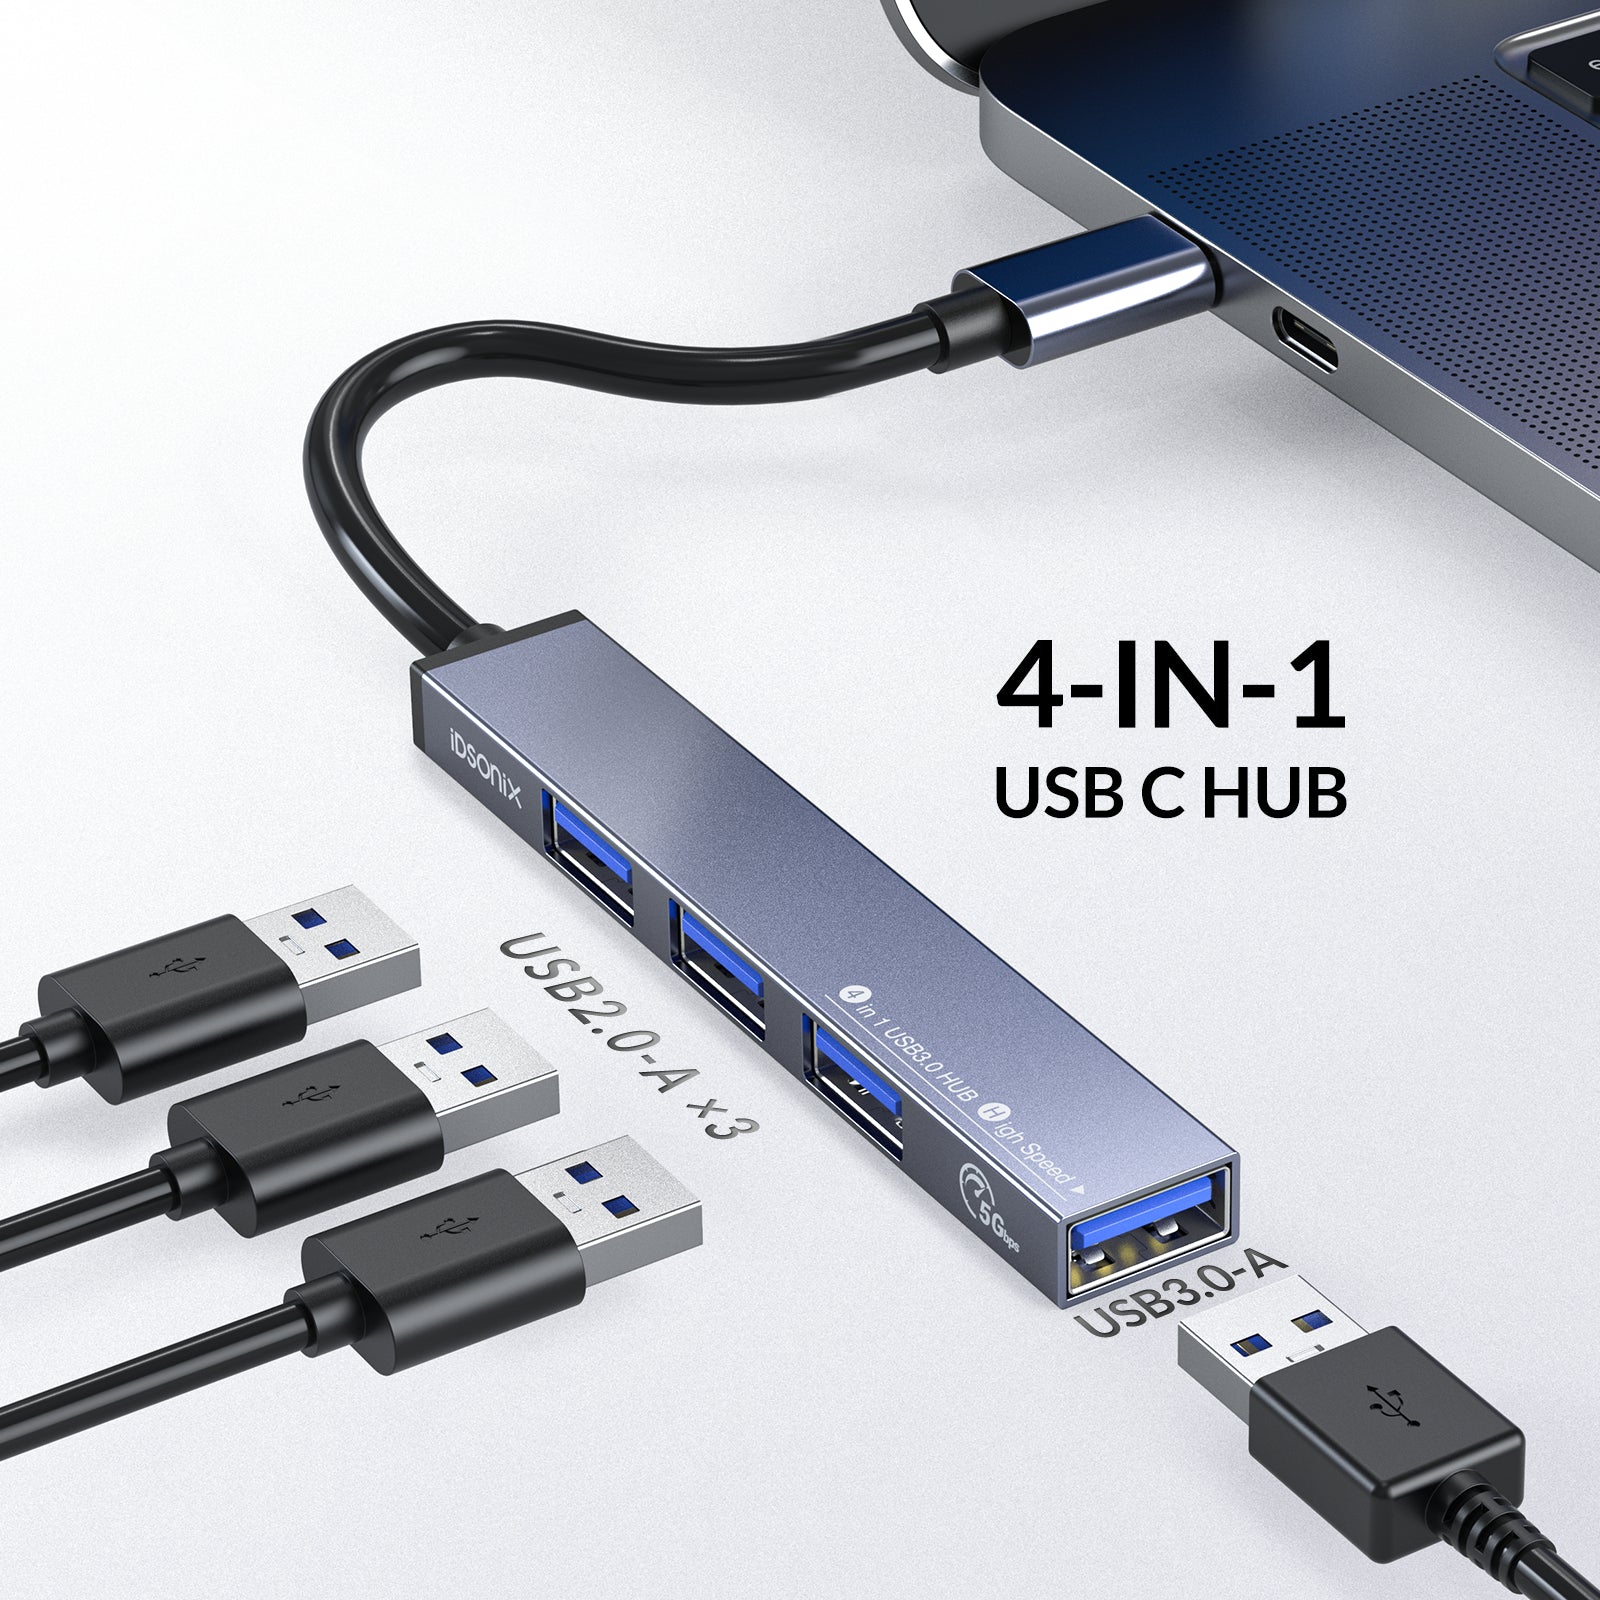 iDsonix USB Hub, Aluminum 4-Port PS4 USB 3.0 Data to USB Hub Adapter (Ultra-Slim) USB C Splitter for Laptop Compatible with PC,MacBook Air, Mac Pro/Mini, Surface Pro, Flash Drive, Mobile HDD and More